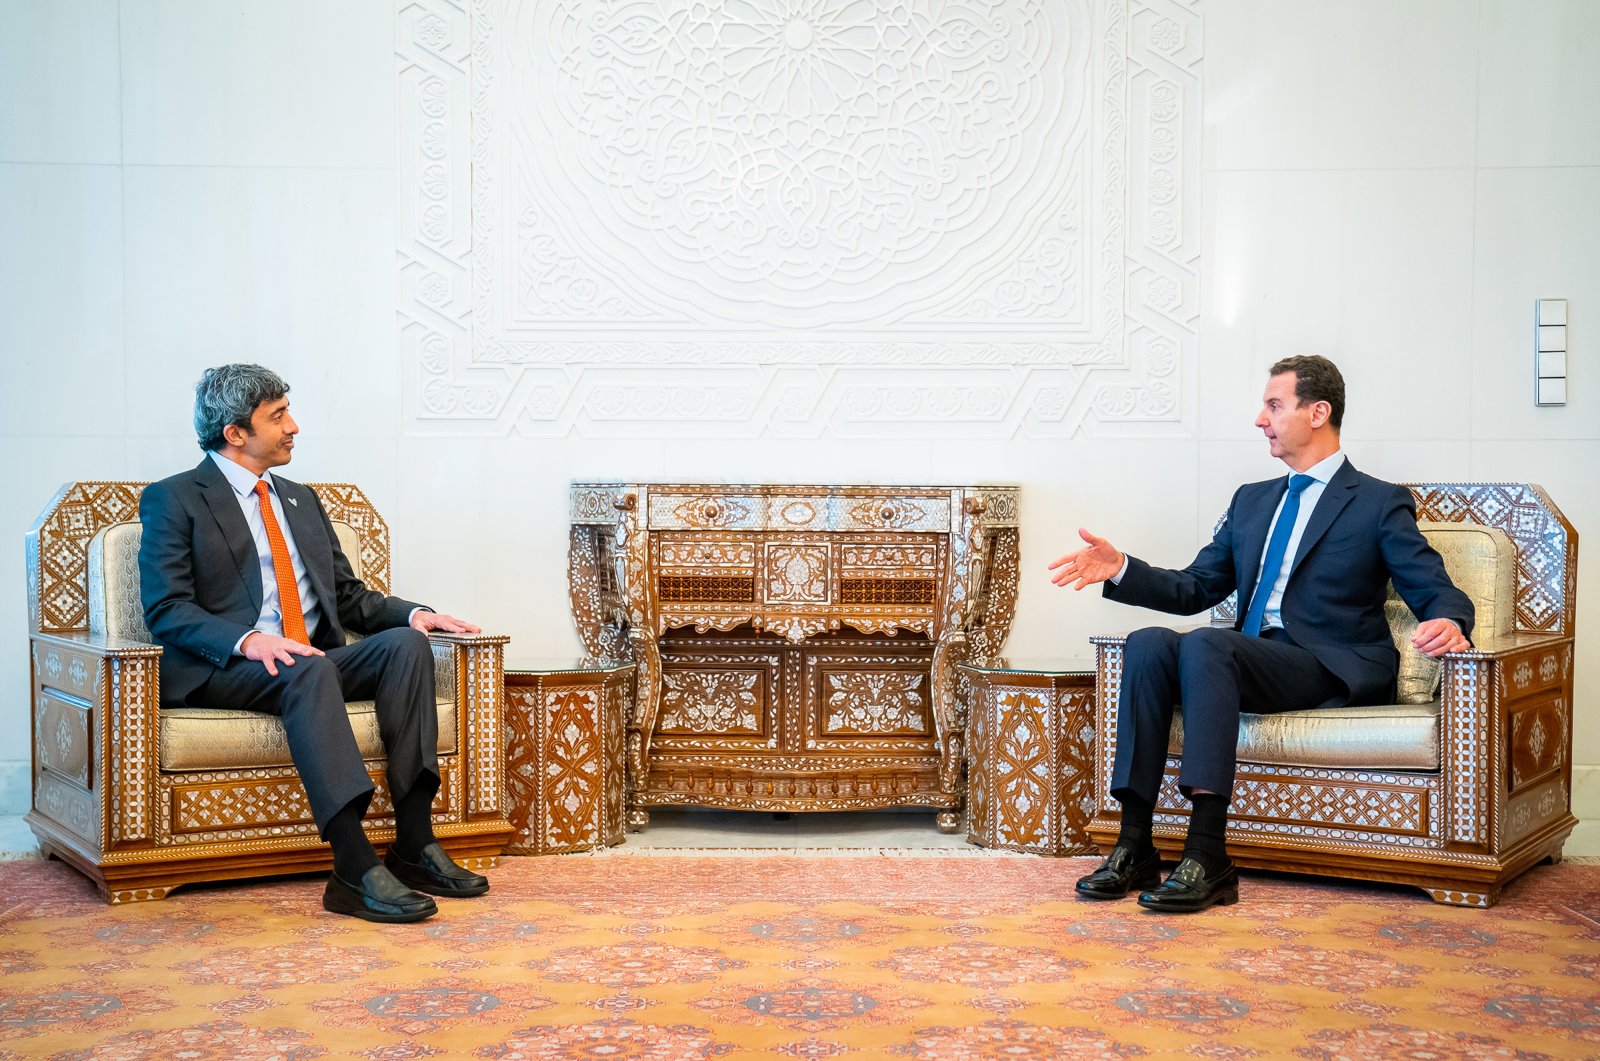 A handout photo made available by Emirates News Agency (WAM) shows United Arab Emirates Minister of Foreign Affairs and International Co-operation Sheikh Abdullah bin Zayed bin Sultan Al Nahyan (L) talking with Syria's Bashar Assad during his visit to Damascus, Syria, 09 November 2021. (EPA Photo)